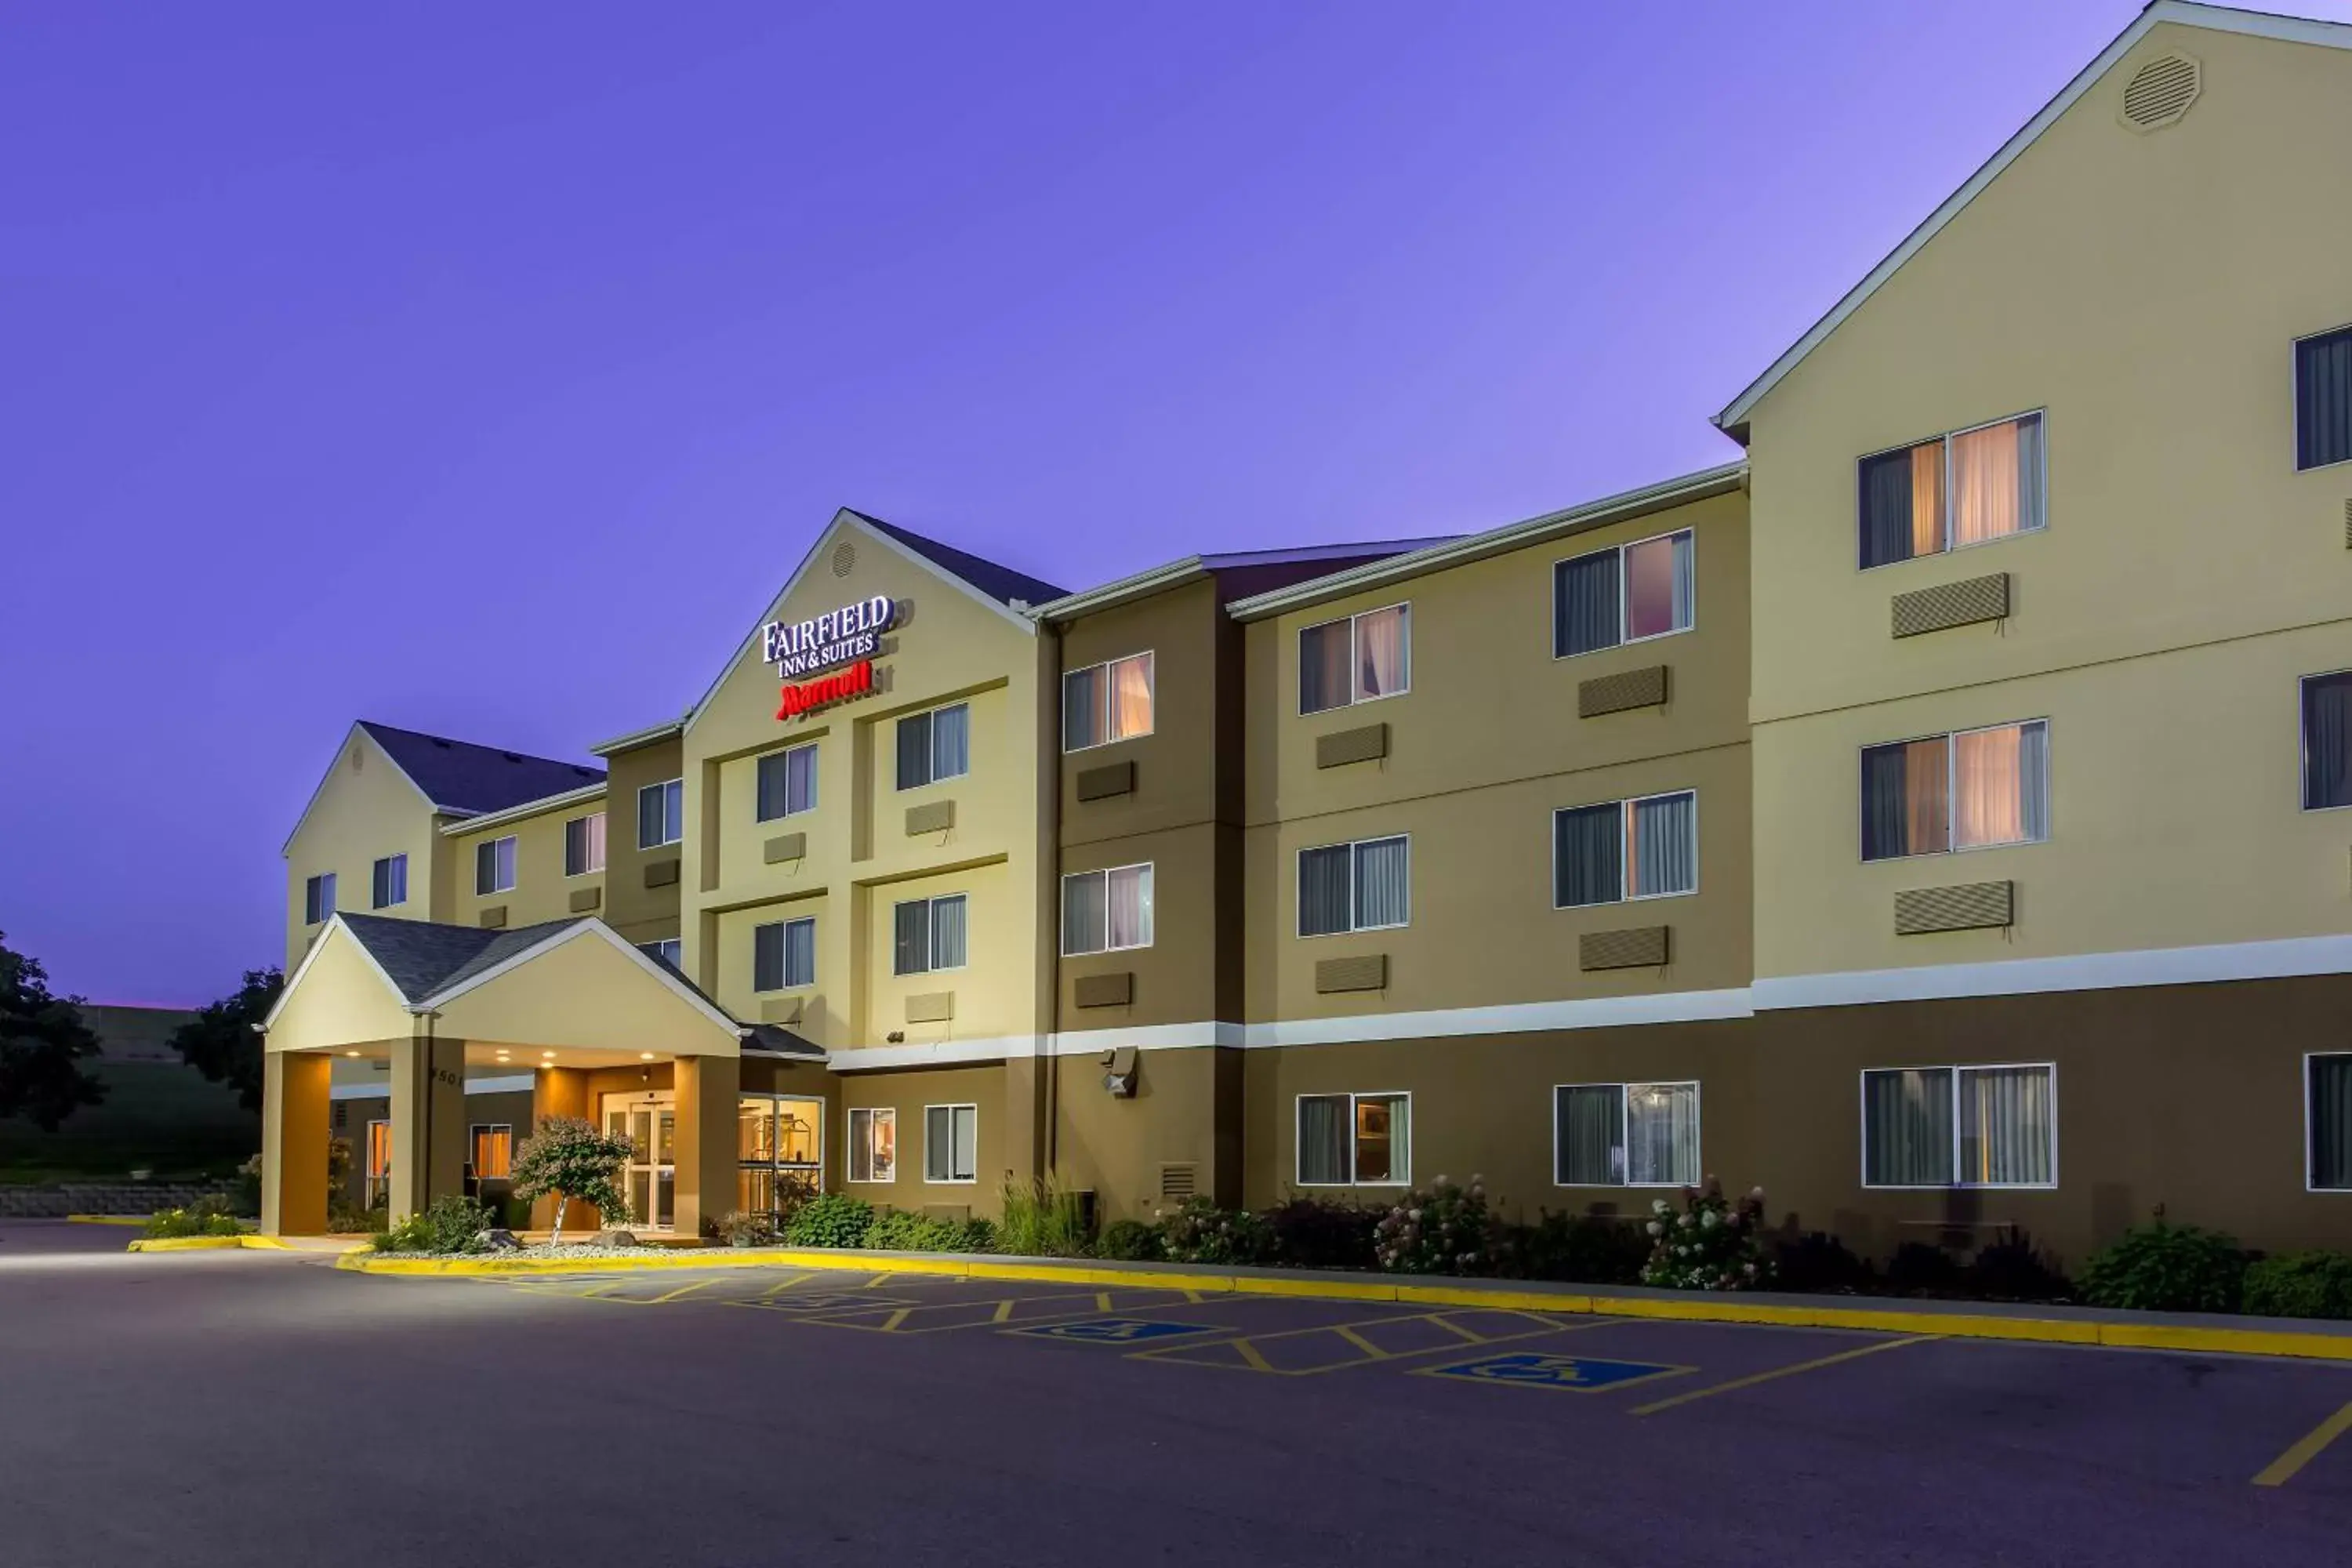 Property Building in Fairfield Inn & Suites Sioux Falls